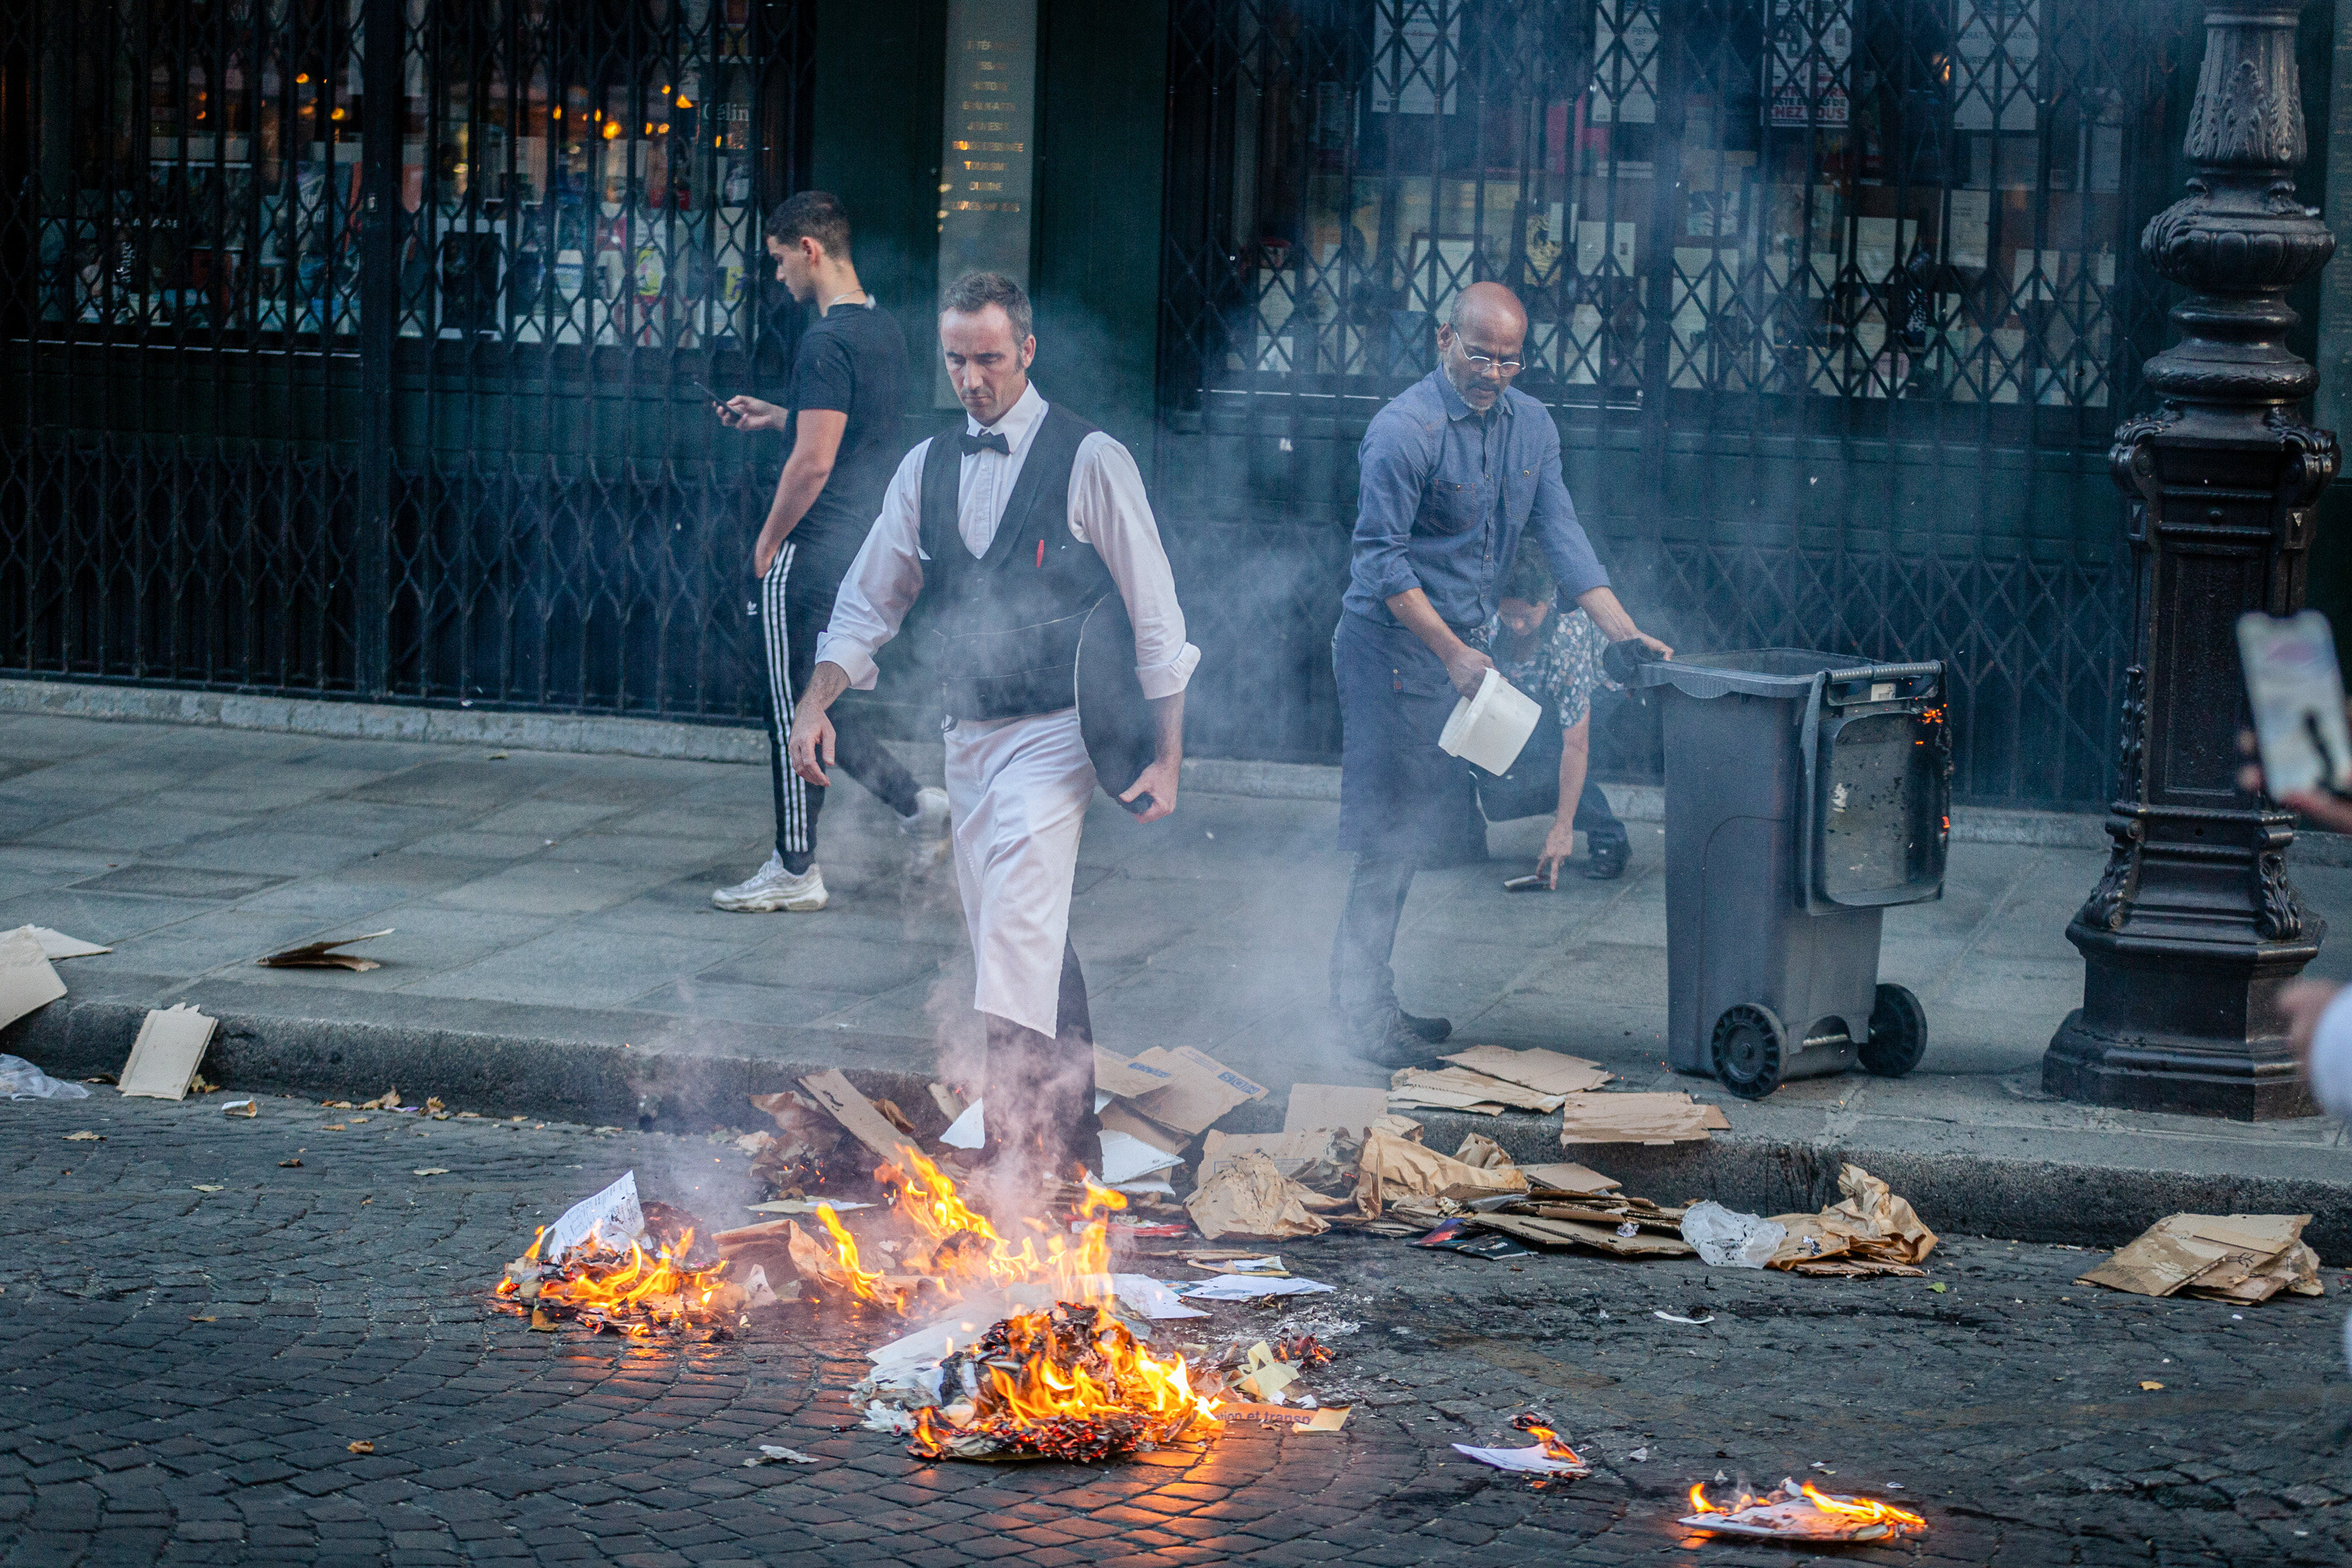 Restaurant employees put out a fire started by demonstrators on June 30 in Paris during a protest following the police shooting of a 17-year-old. Photo: dpa 